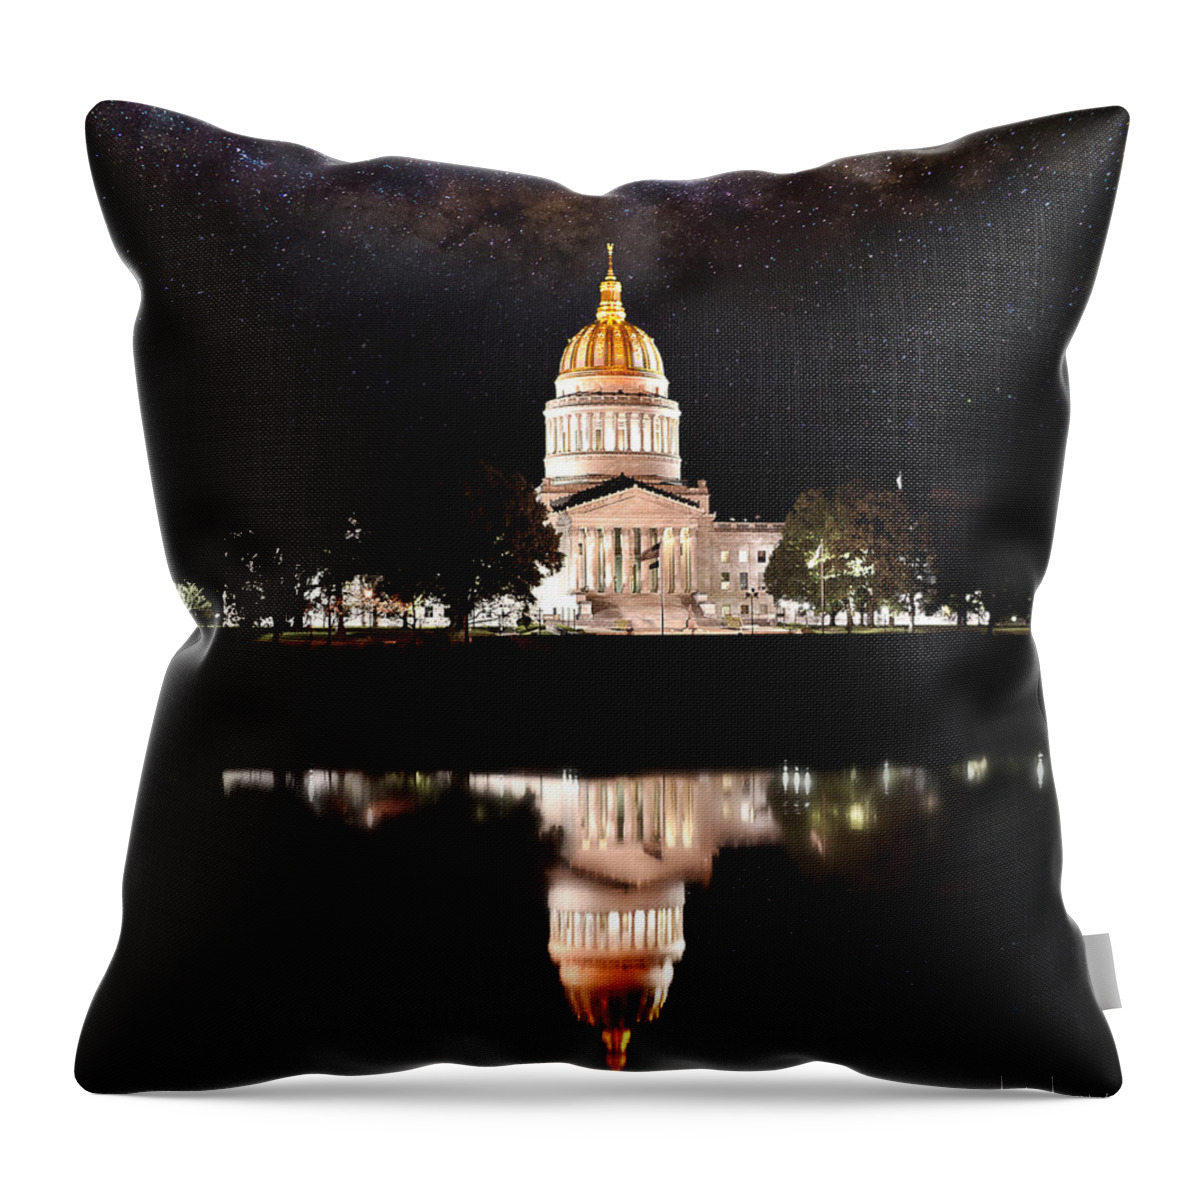 State Capitol Throw Pillow featuring the photograph West Virginia State Capitol by Lisa Lambert-Shank